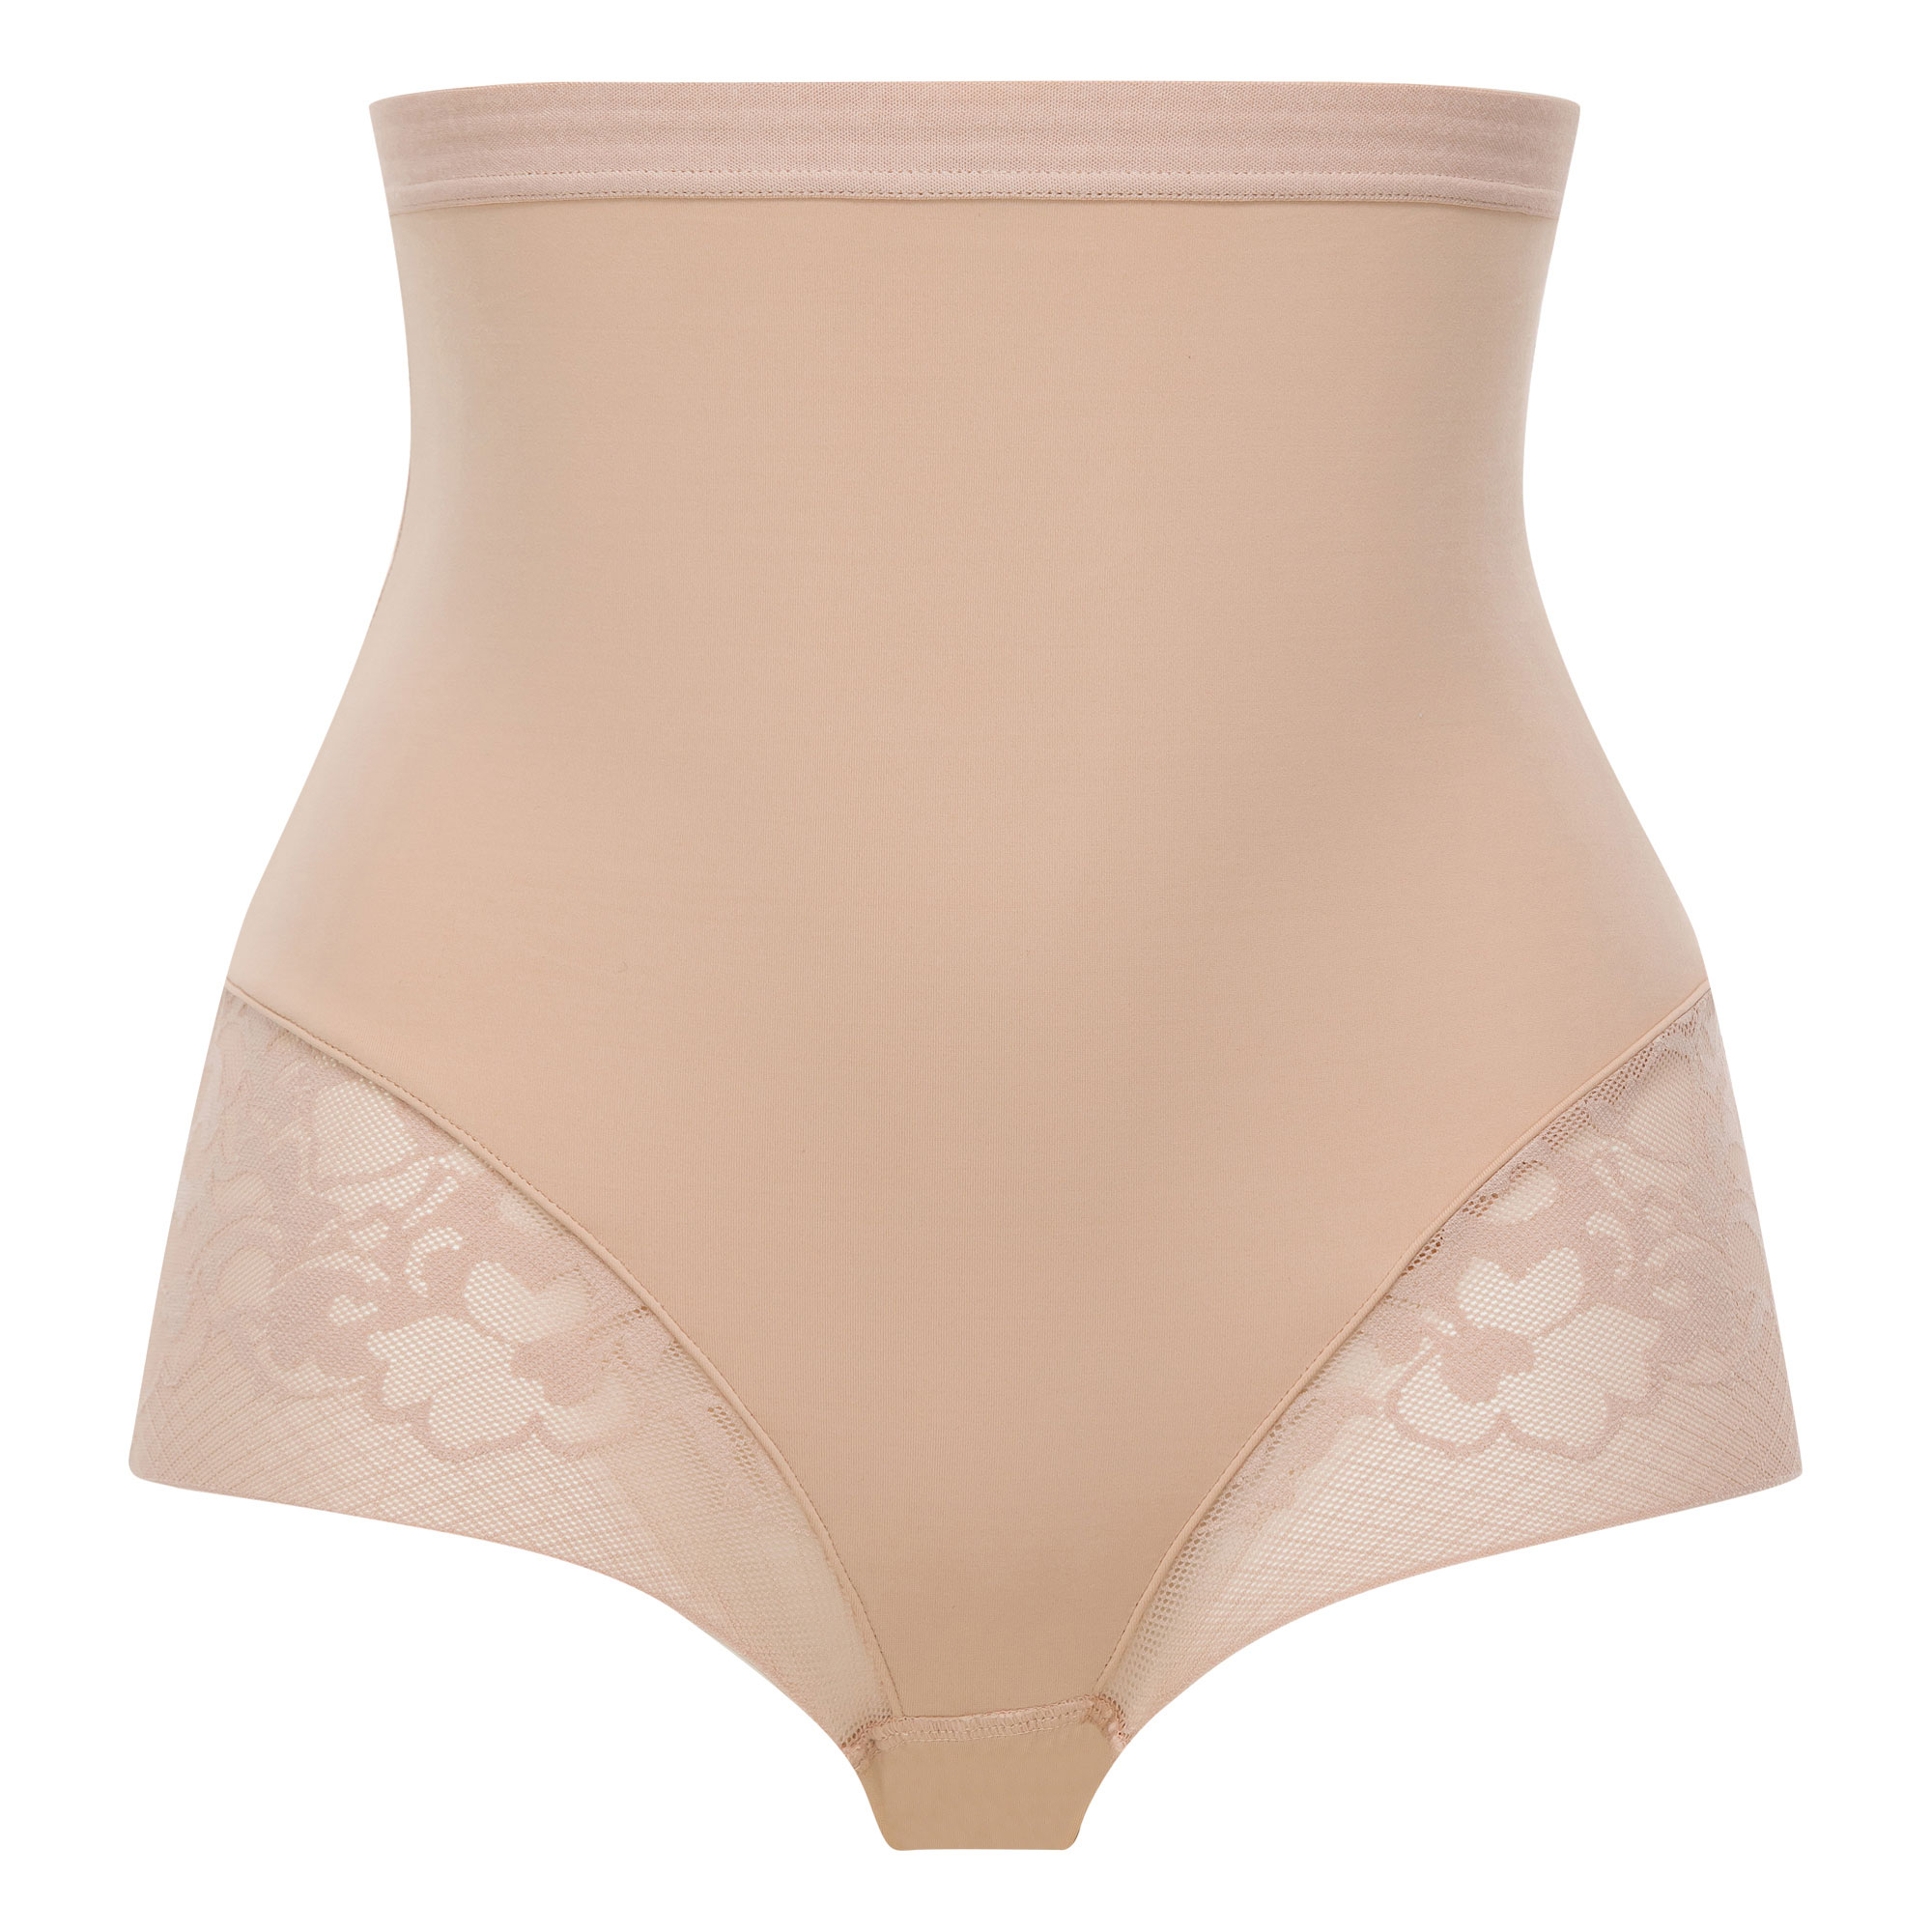 All-in-one Girdle In Beige – I Can't Believe It's A Girdle | lupon.gov.ph